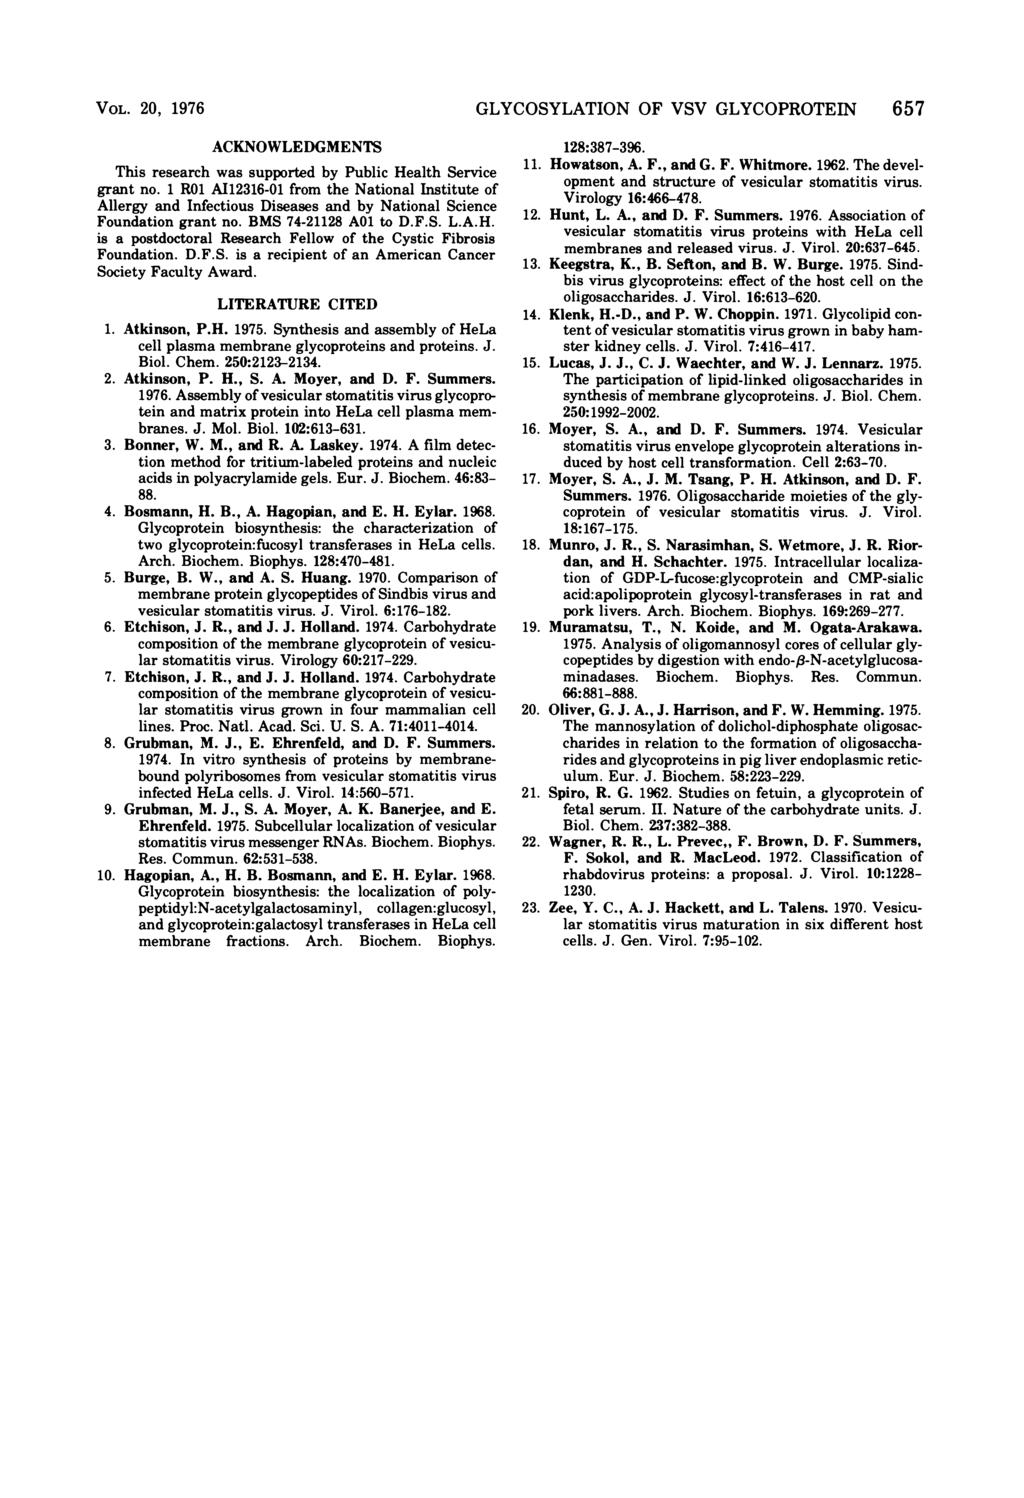 VOL. 20, 1976 ACKNOWLEDGMENTS This research was supported by Public Health Service grant no.